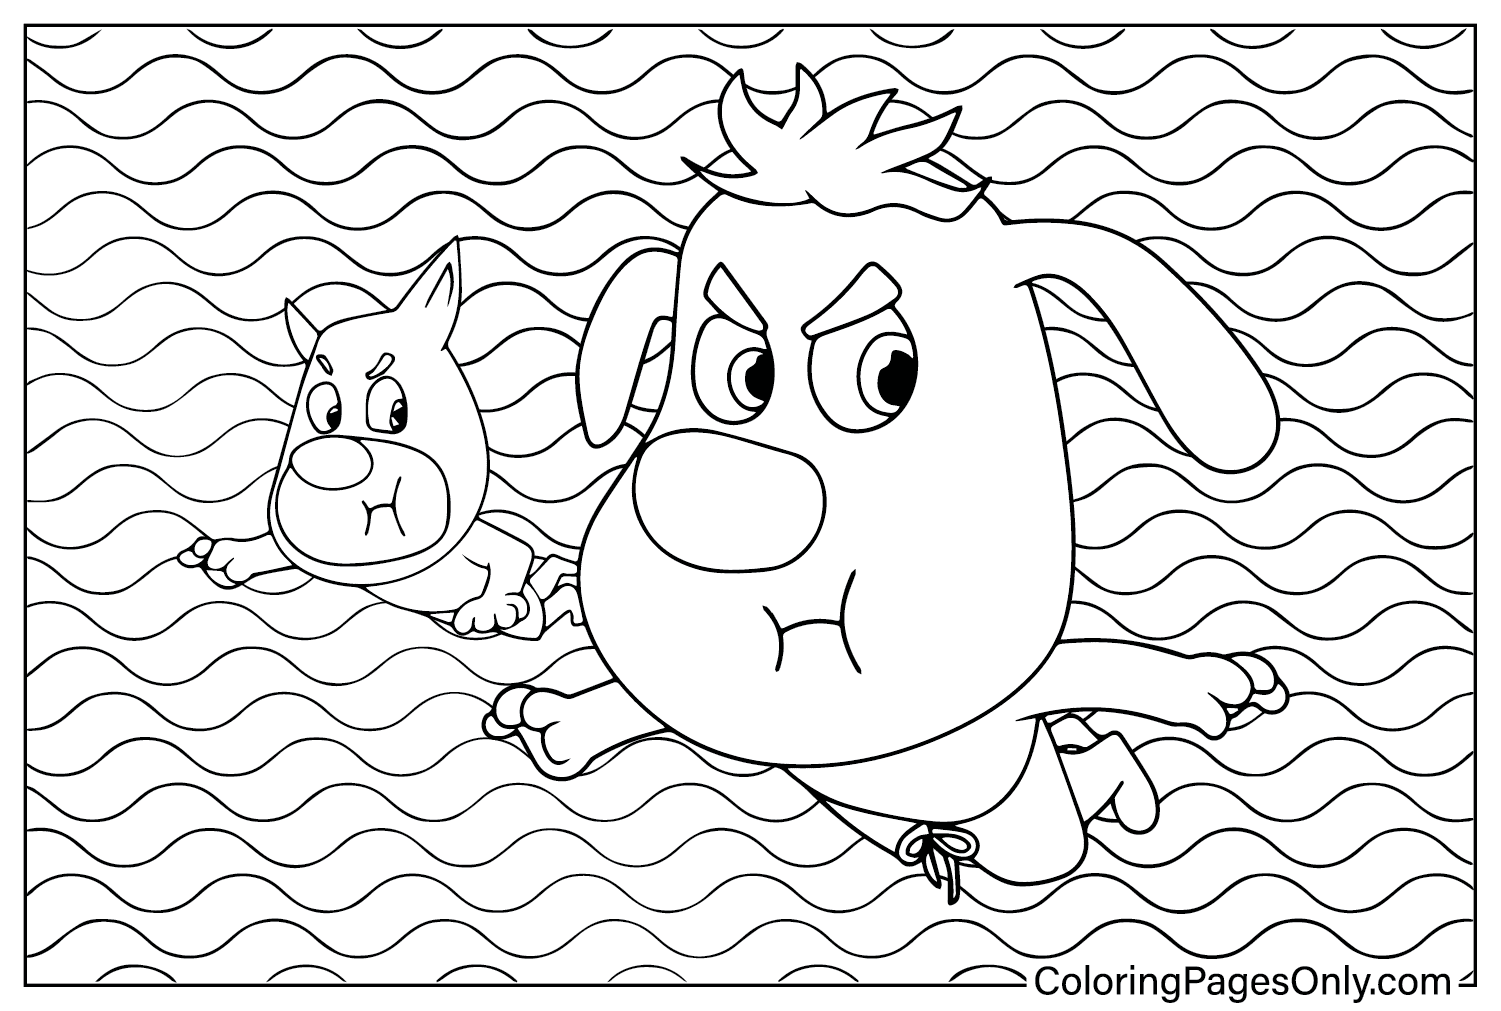 Free Safety Sheriff Labrador Coloring Page from Safety Sheriff Labrador